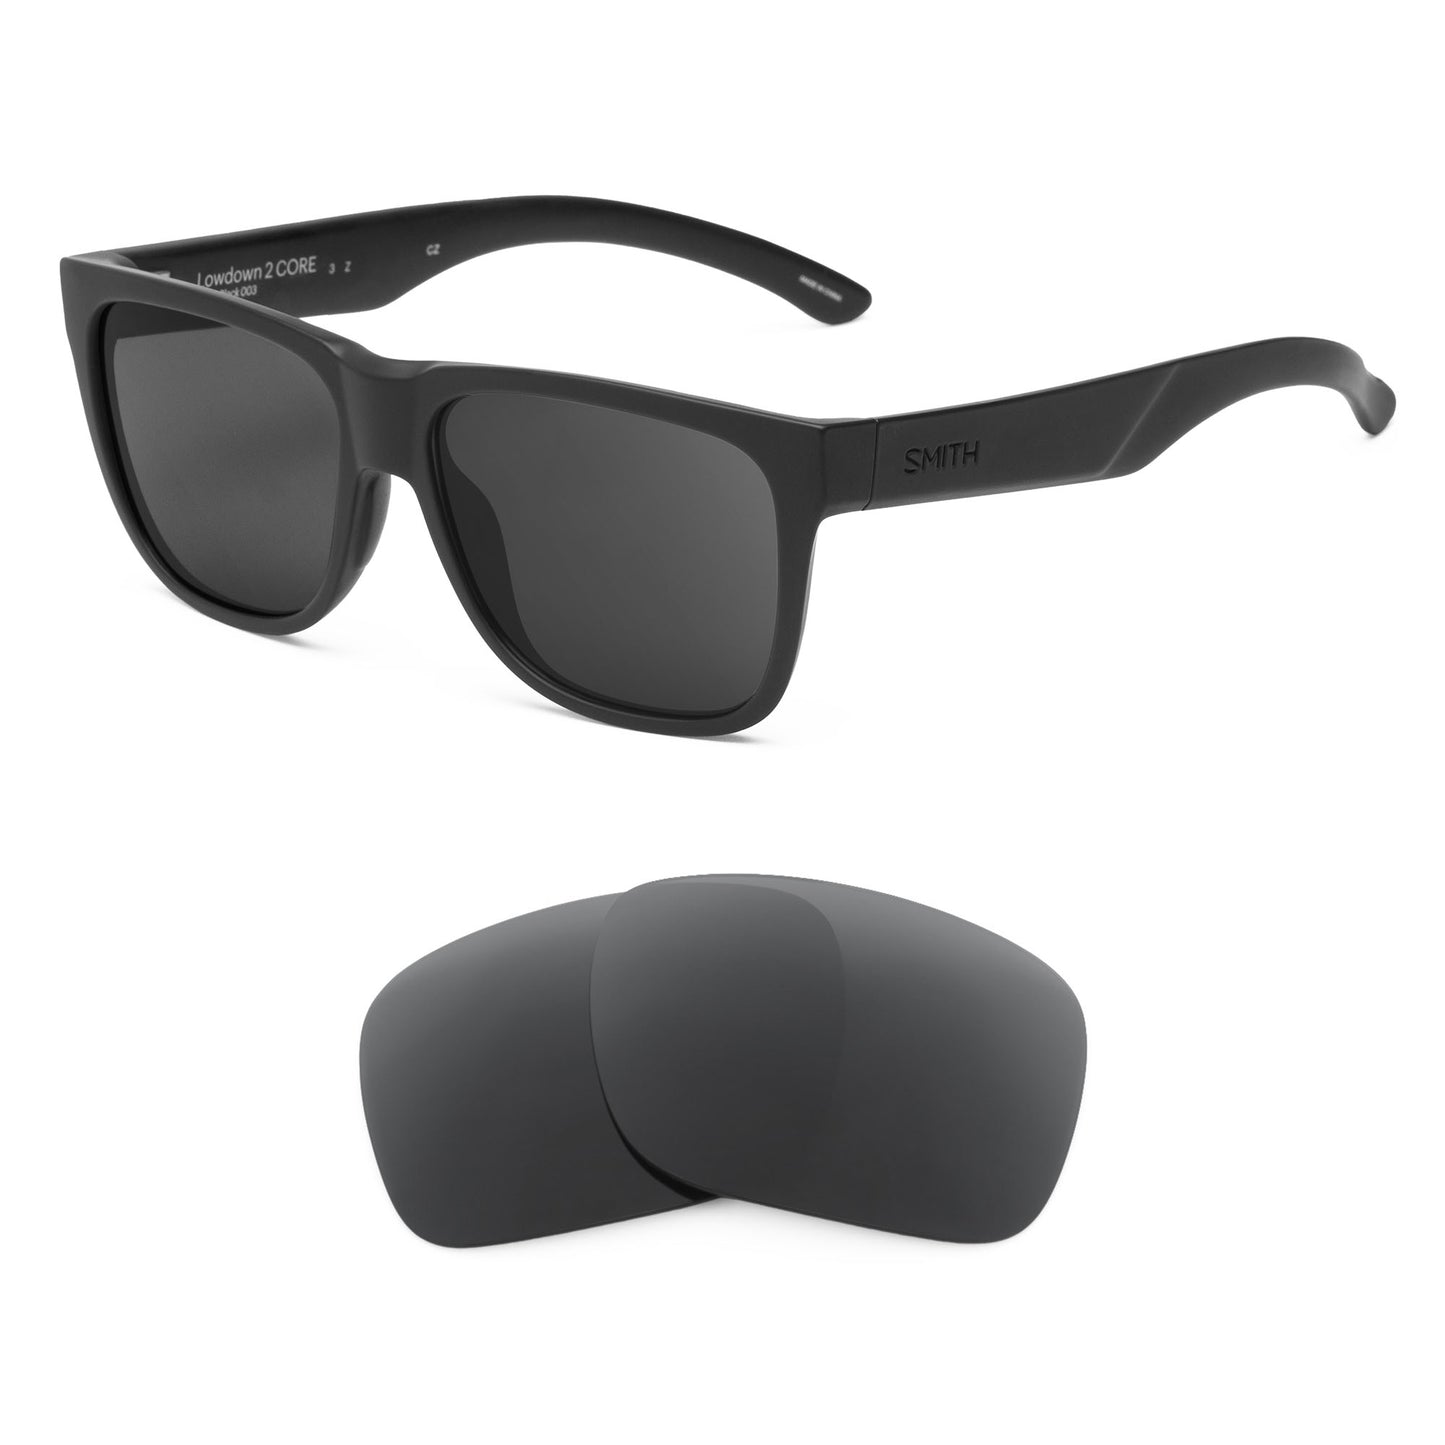 Smith Lowdown 2 CORE sunglasses with replacement lenses